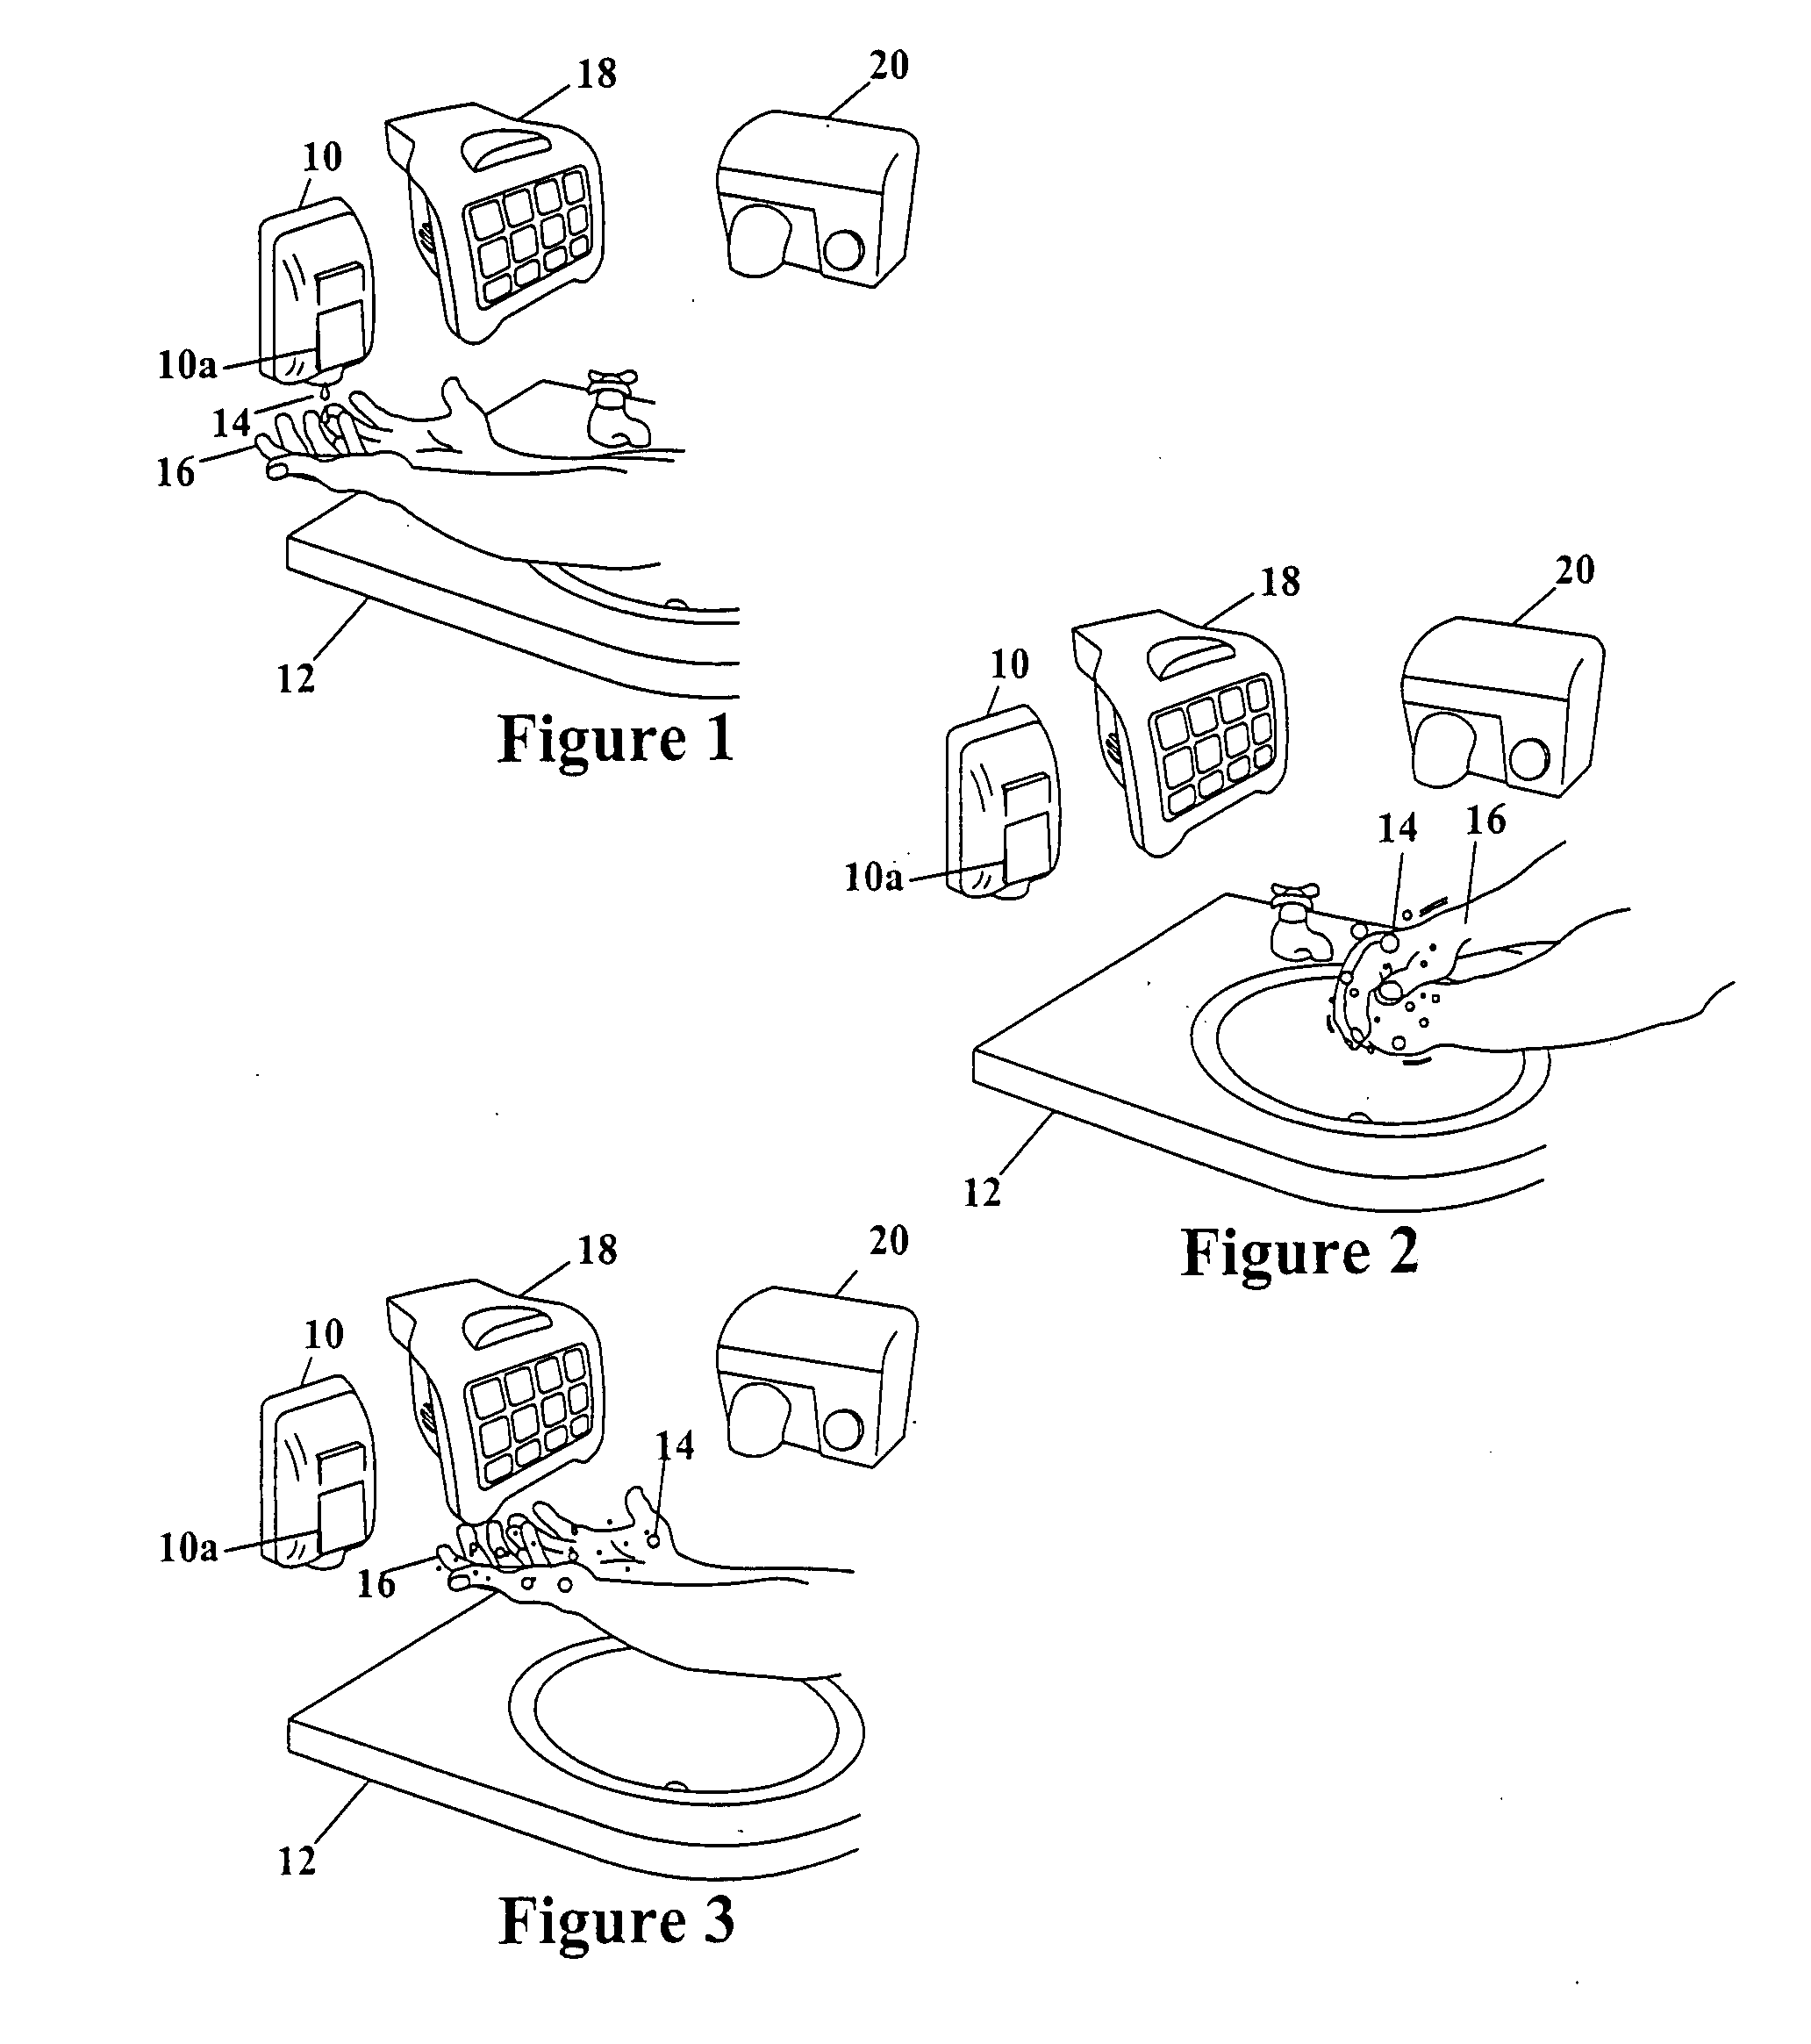 Hand hygiene verification/tracking system and method